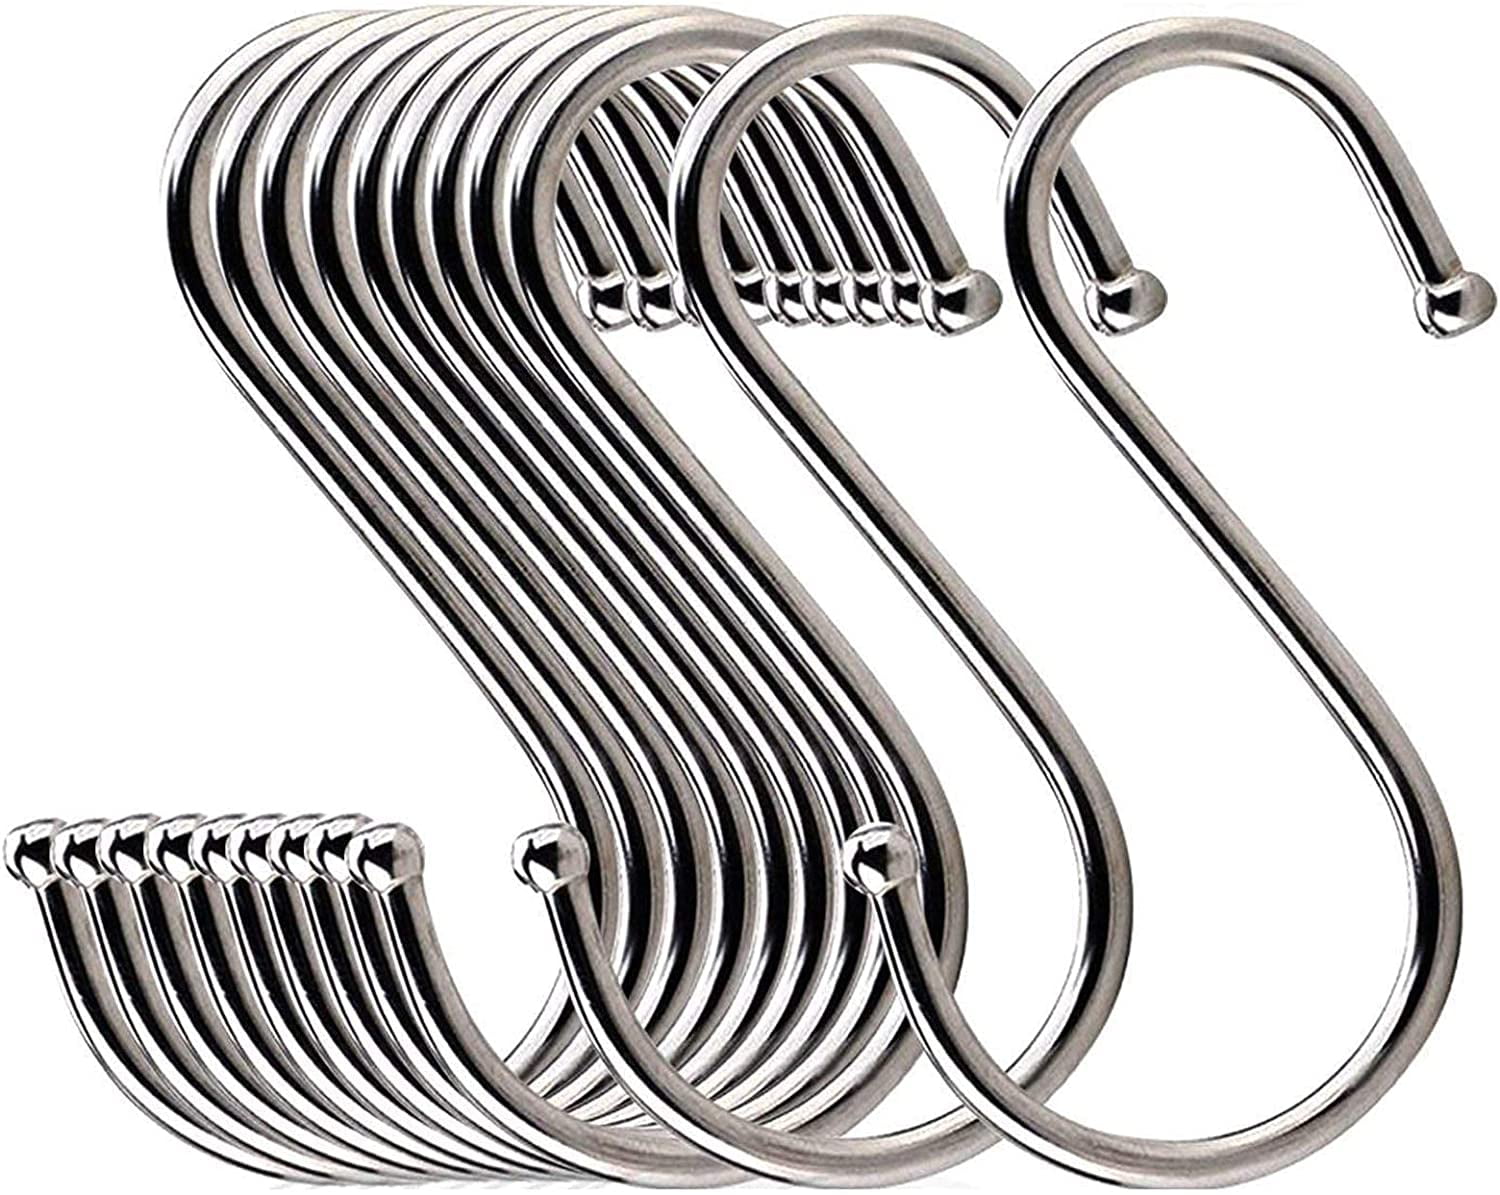 S Hooks for Hanging, Stainless Steel S Shaped S Hooks,Heavy Duty S Hooks  Hanging Hooks for Hanging Plants, Clothes, Pot, Pan, Cups(Silver,6 Pack)